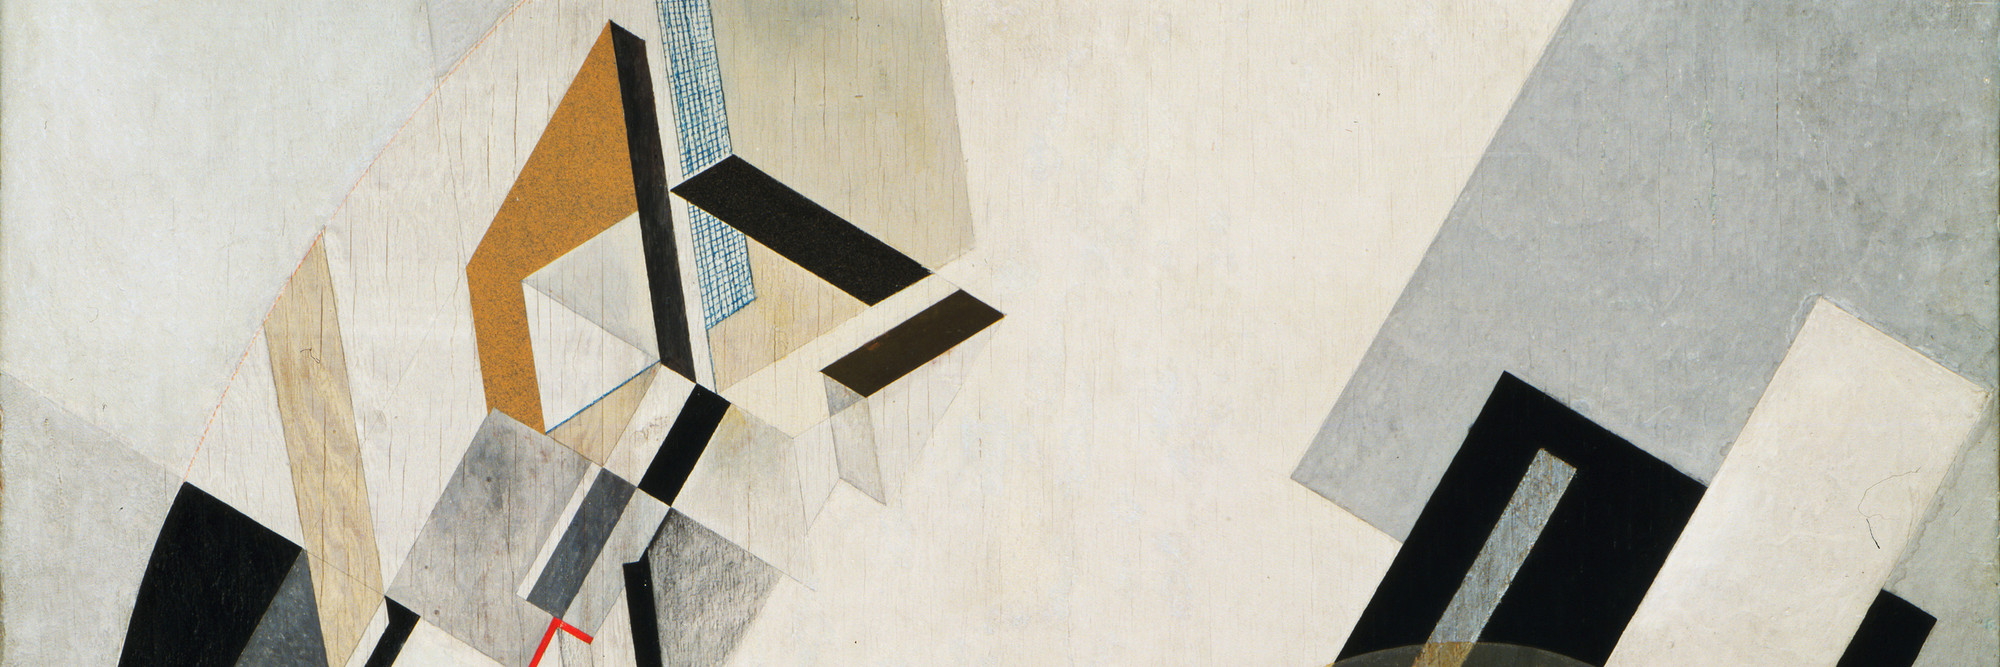 El Lissitzky. Proun 19D. 1921. Gesso, oil, collage of cut paper, cardboard, and silver paper on plywood, 38 3/8 x 38 1/4&#34; (97.5 x 97.2 cm). Katherine S. Dreier Bequest. © 2021 Artists Rights Society (ARS), New York / VG Bild-Kunst, Bonn